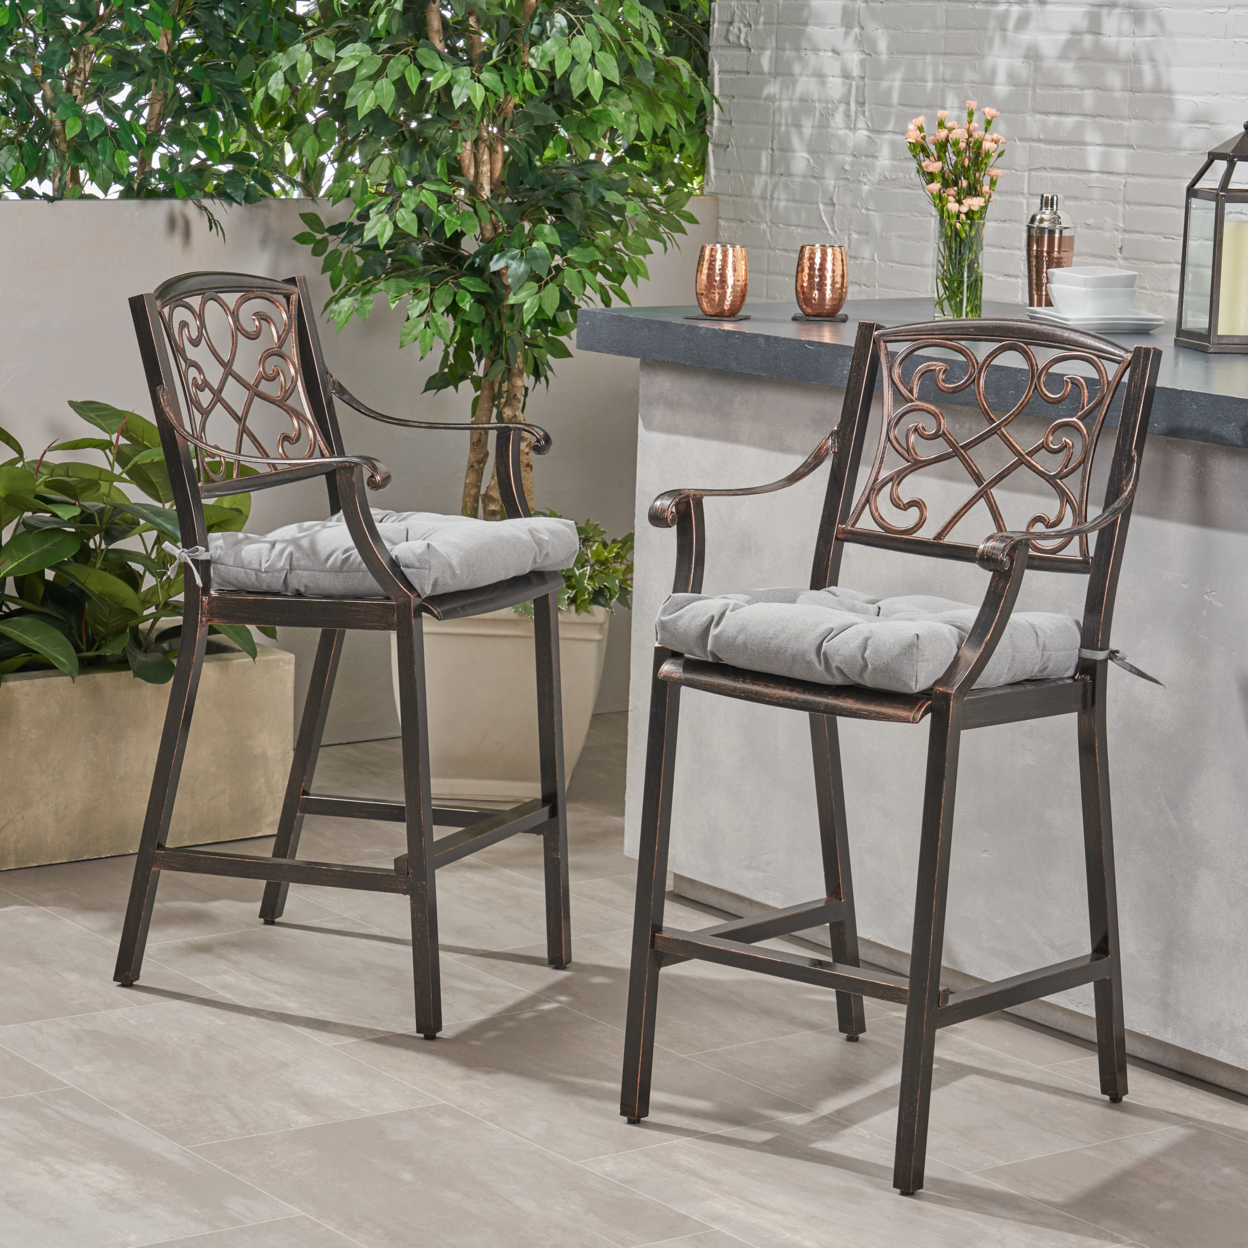 Sherry Outdoor Barstool With Cushion (Set Of 2) - Shiny Copper + Charcoal